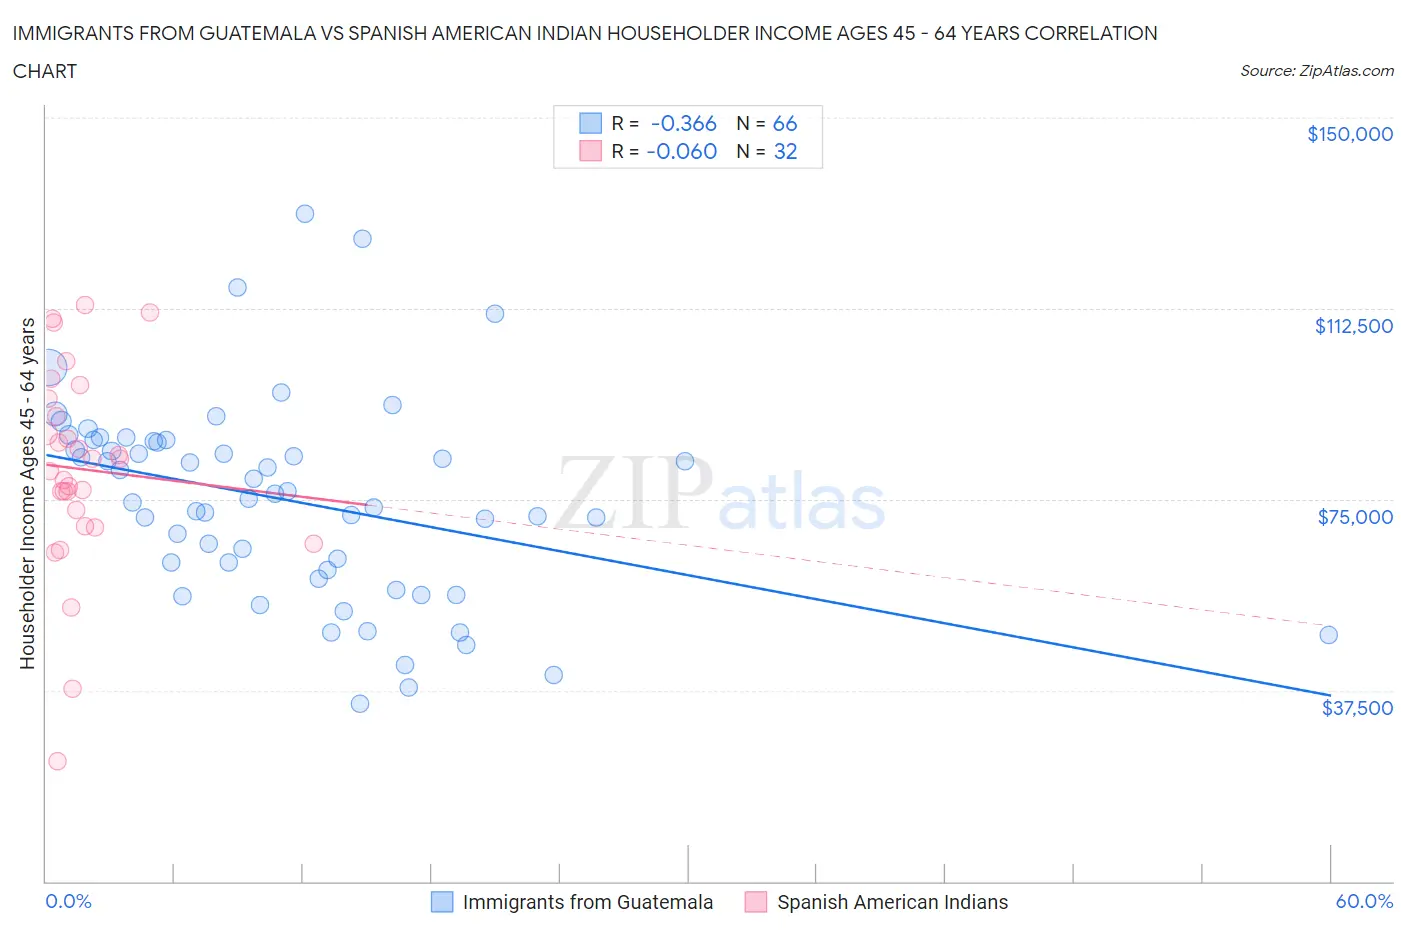 Immigrants from Guatemala vs Spanish American Indian Householder Income Ages 45 - 64 years